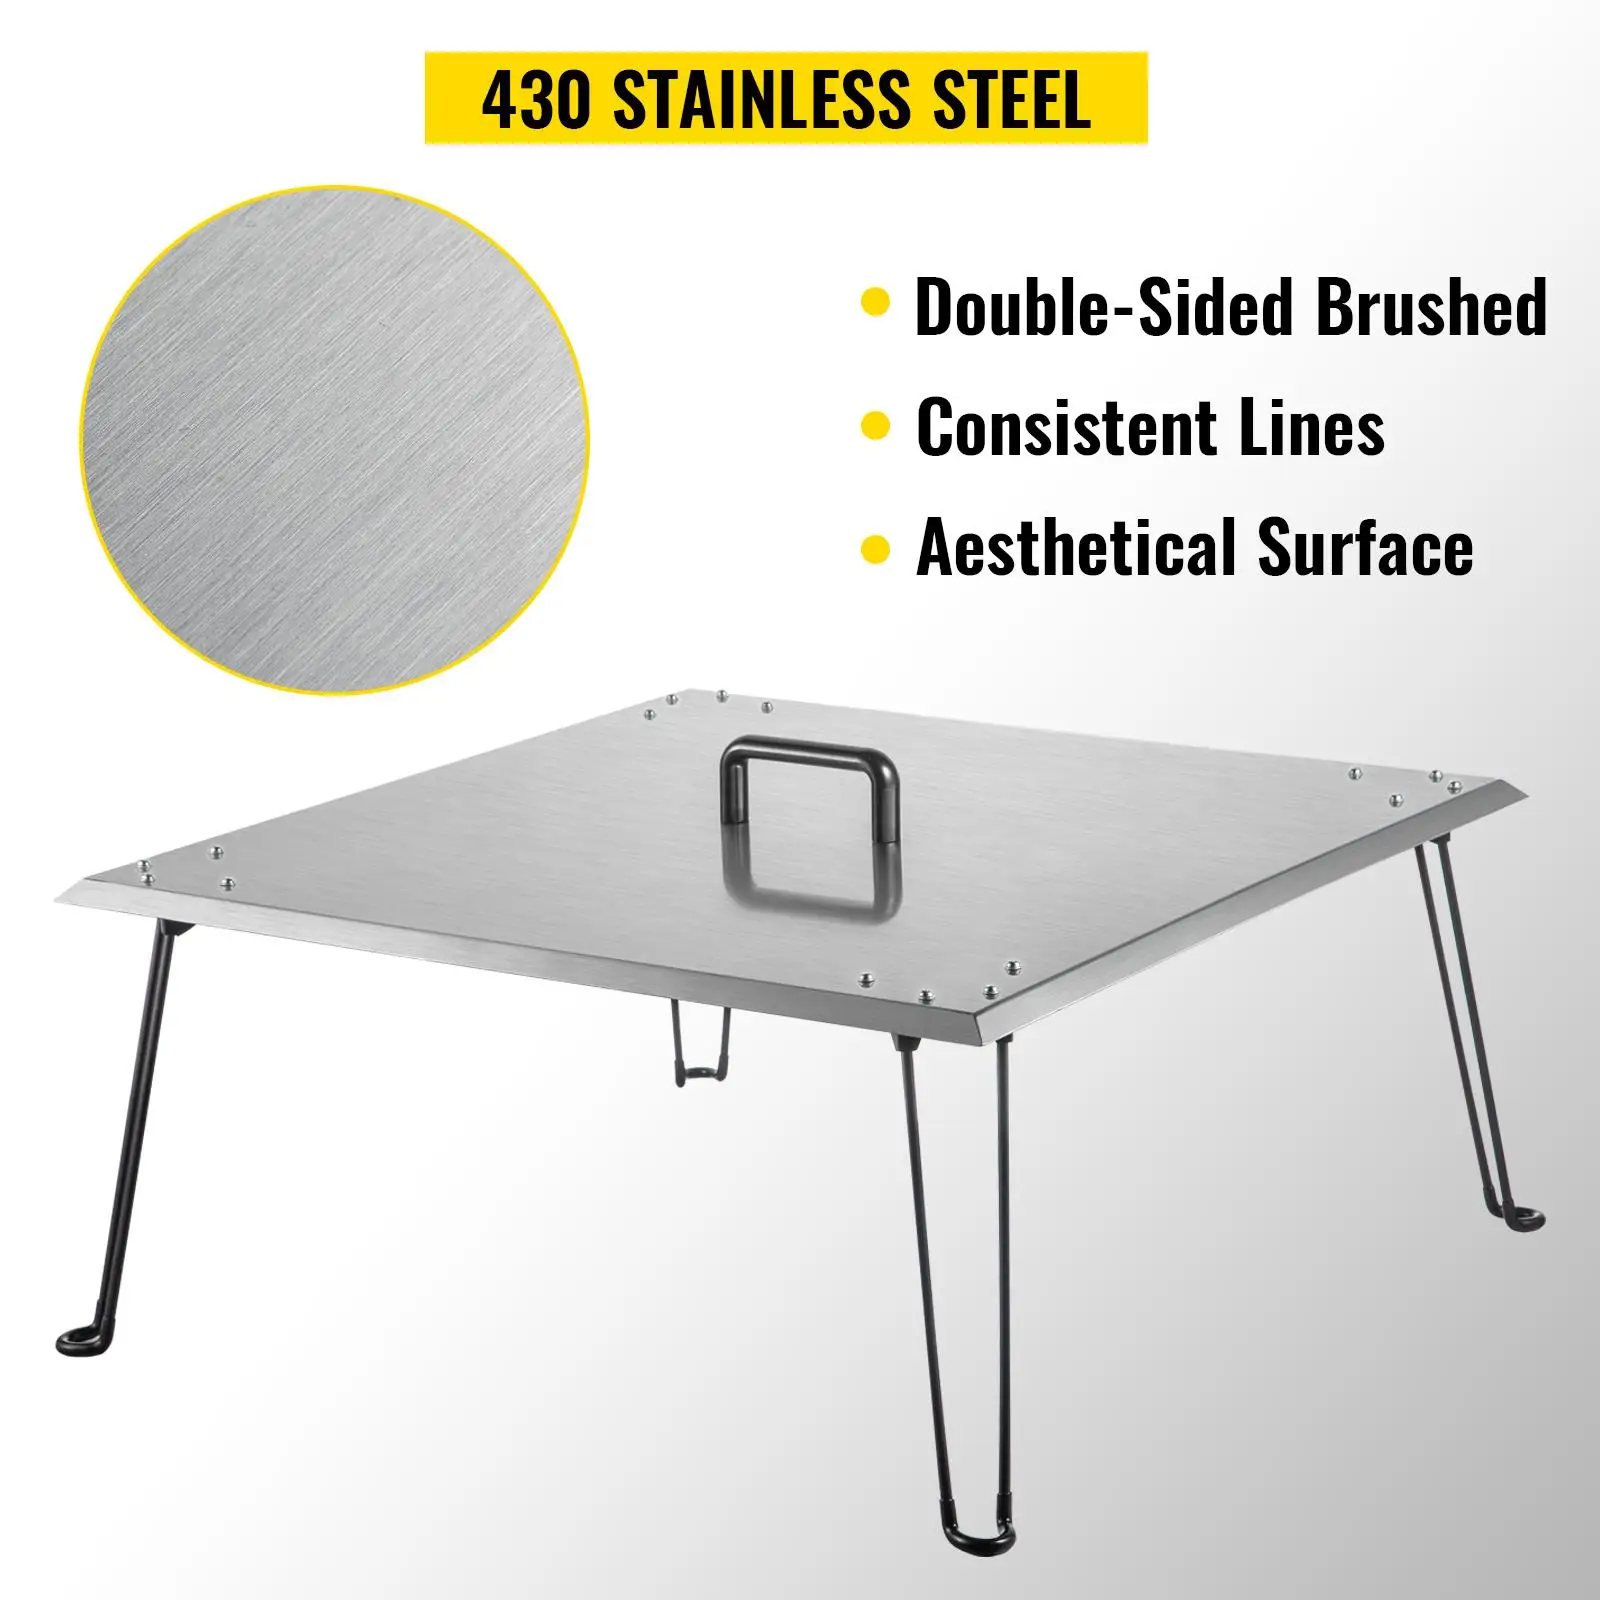 430 stainless steel deflector